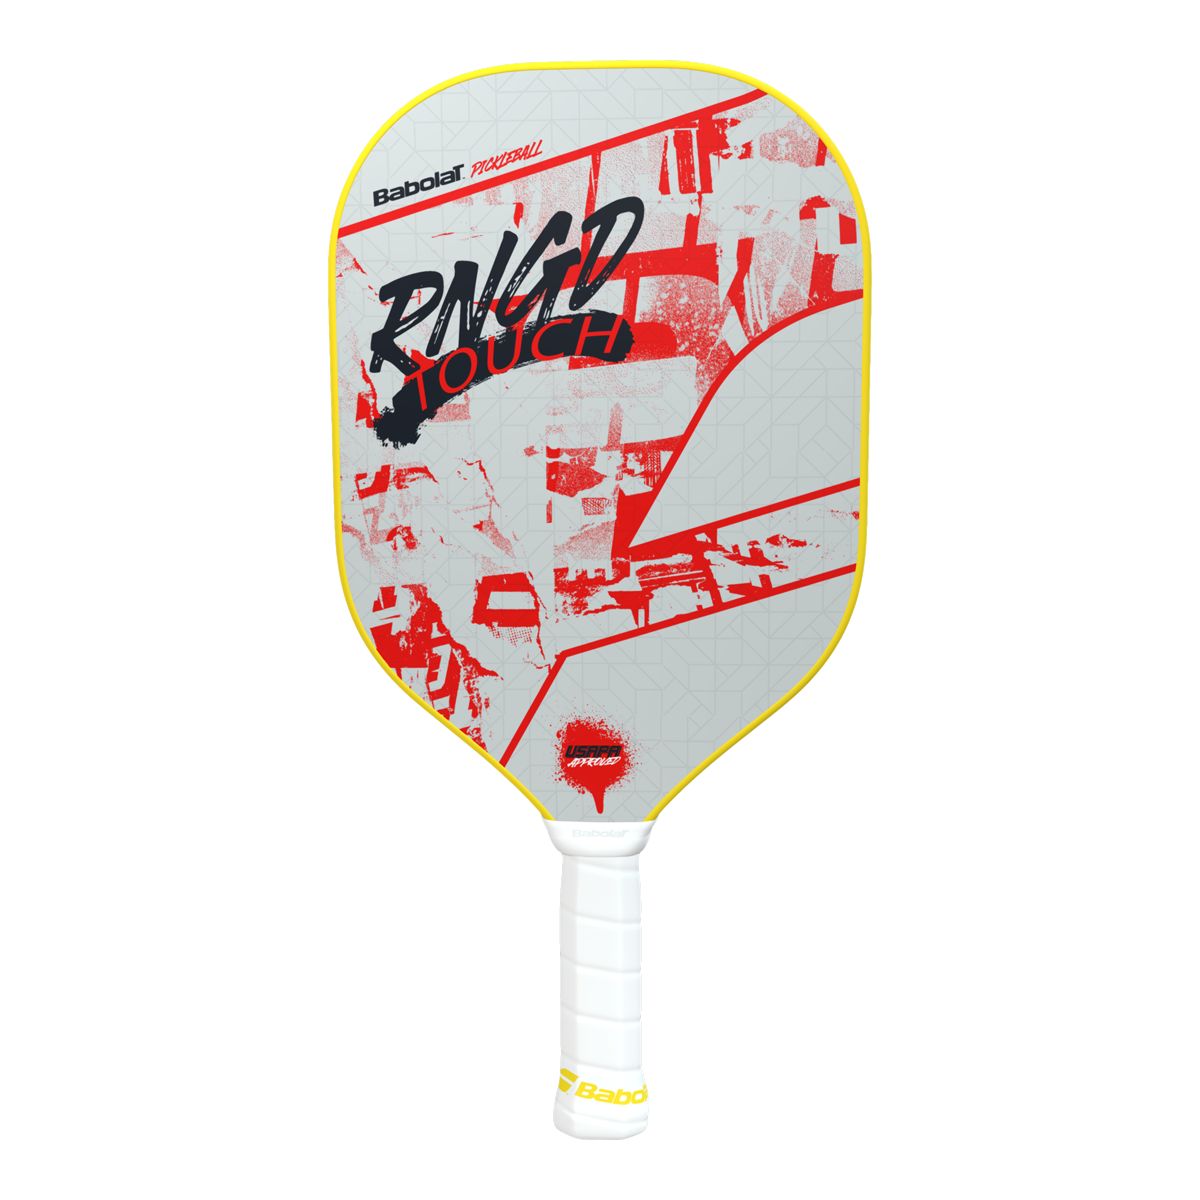 Image of Babolat Rngd Touch Pickleball Paddle